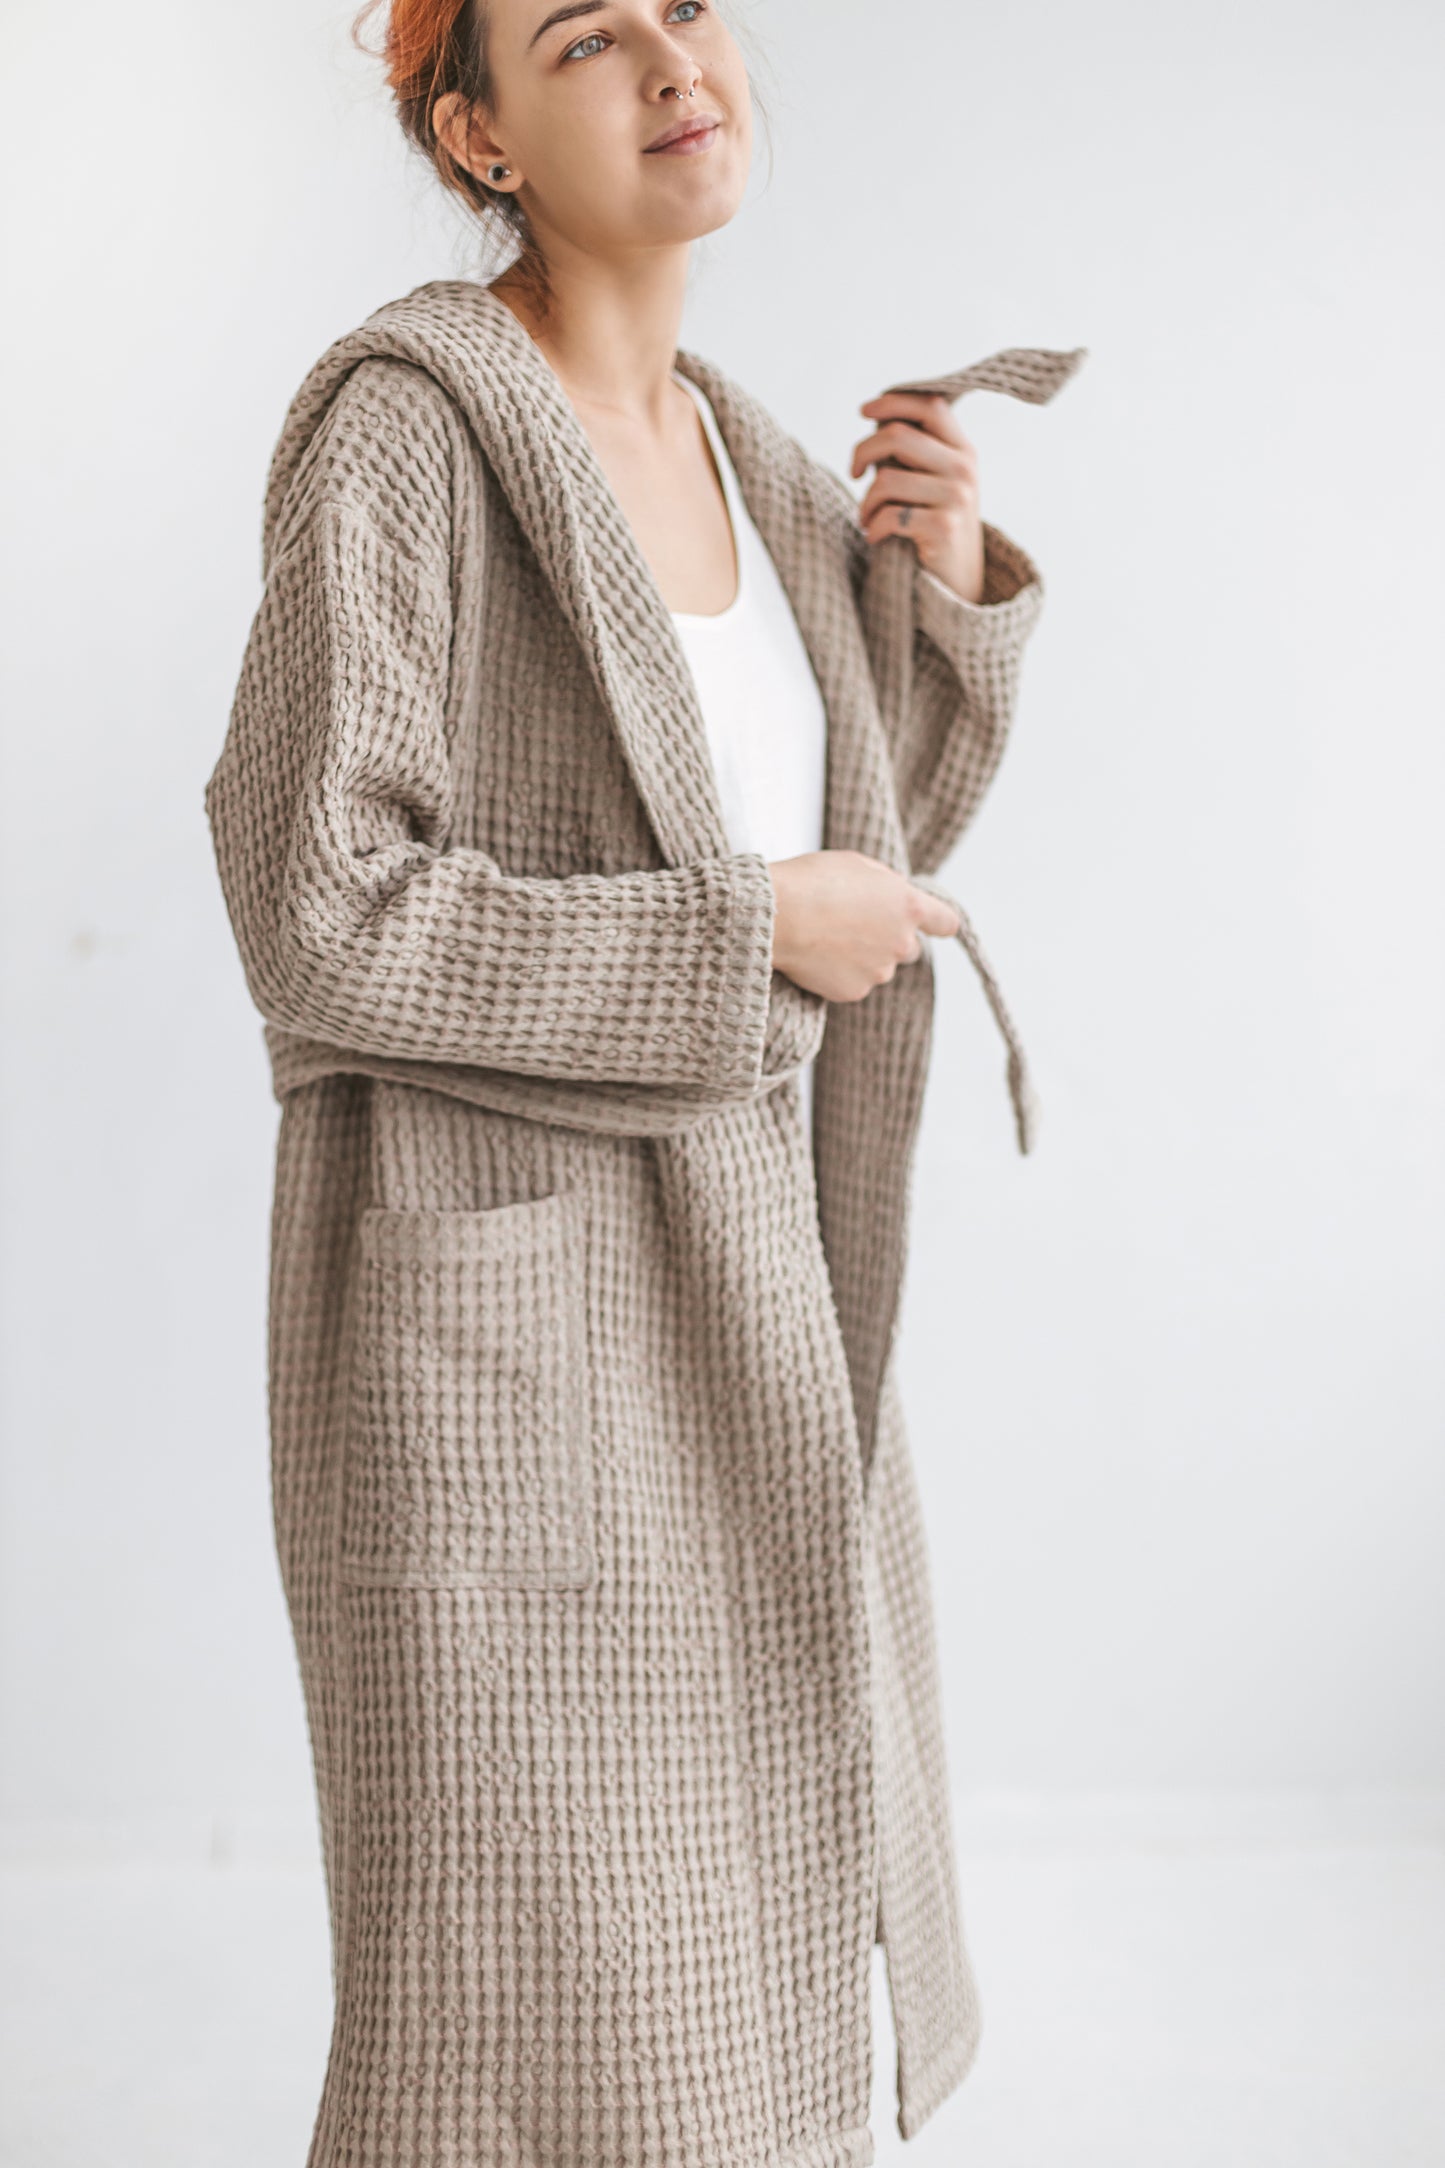 Hooded long organic linen & cotton waffle robe for women and men